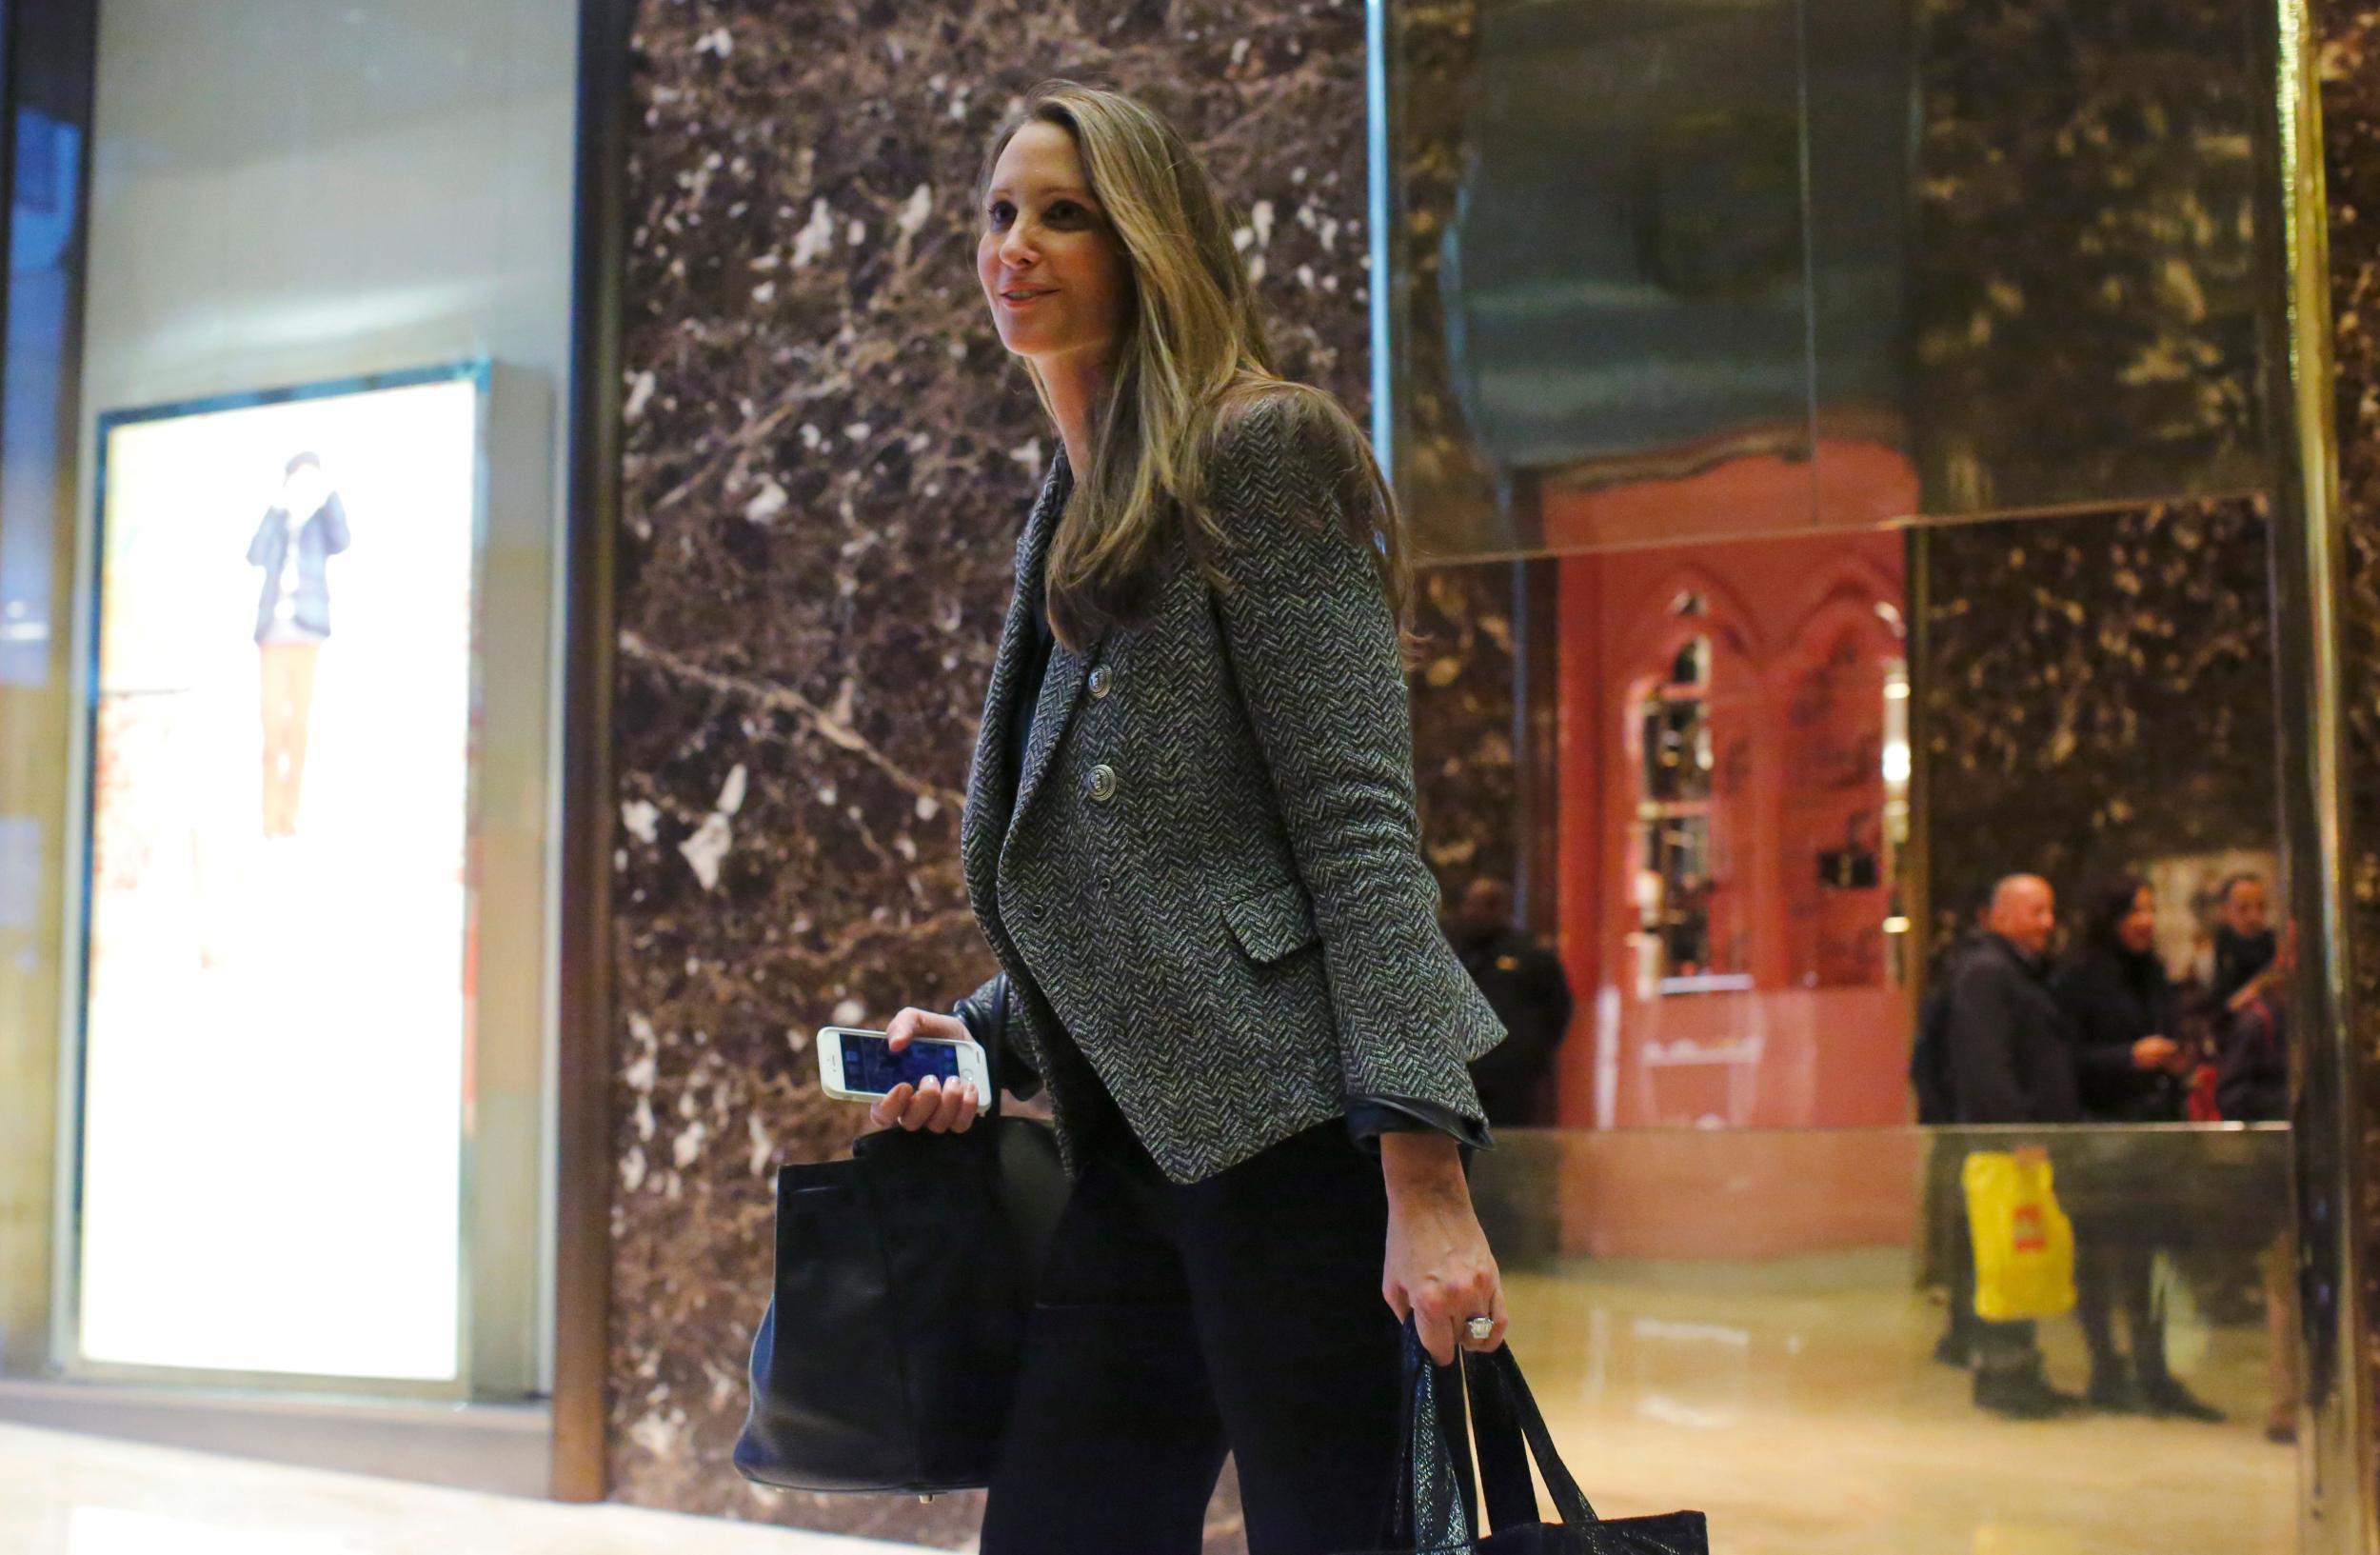 Former Vogue special event planner Stephanie Winston Wolkoff stops for a photo in front of the media at Trump Tower in New York